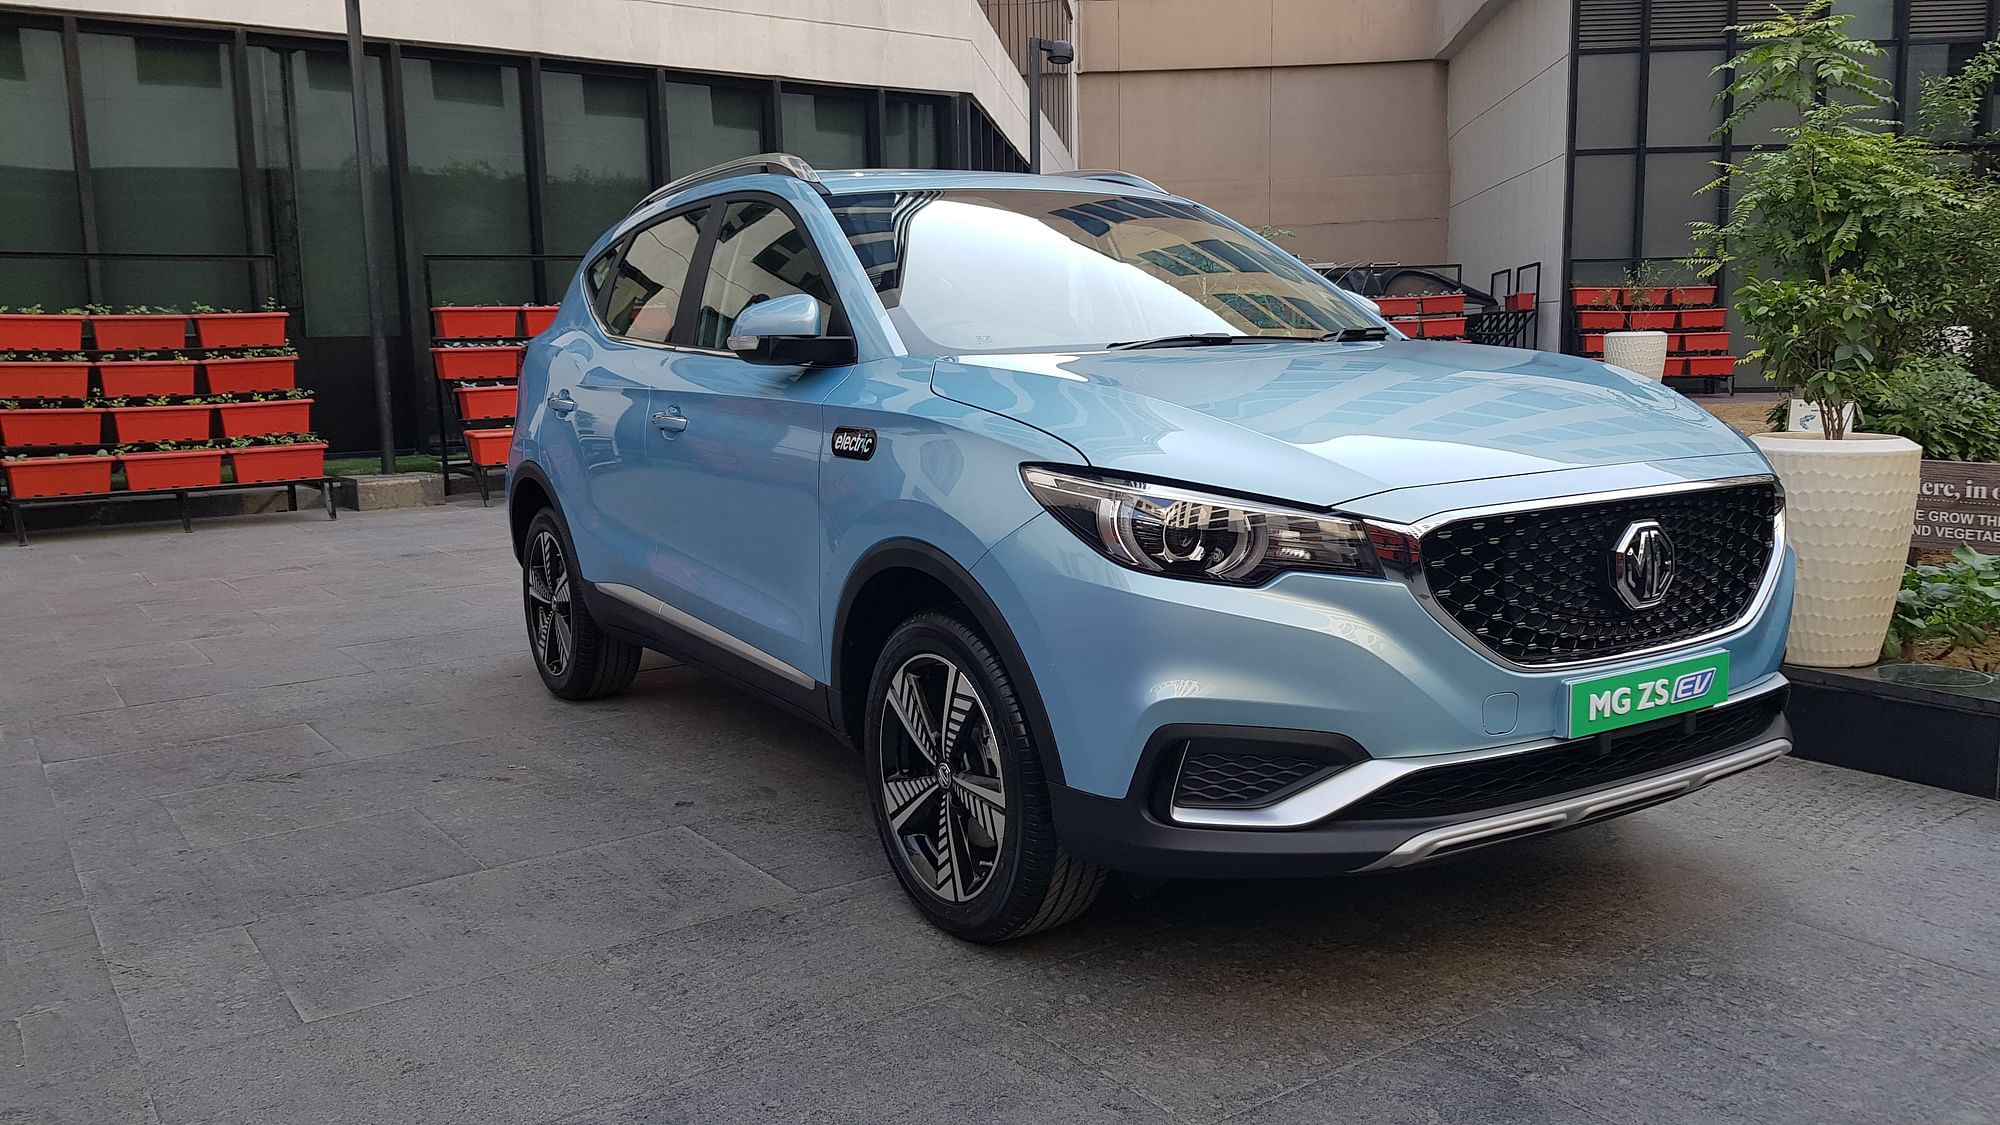 The MG ZS EV will be delivered to buyers January 2020 onwards.